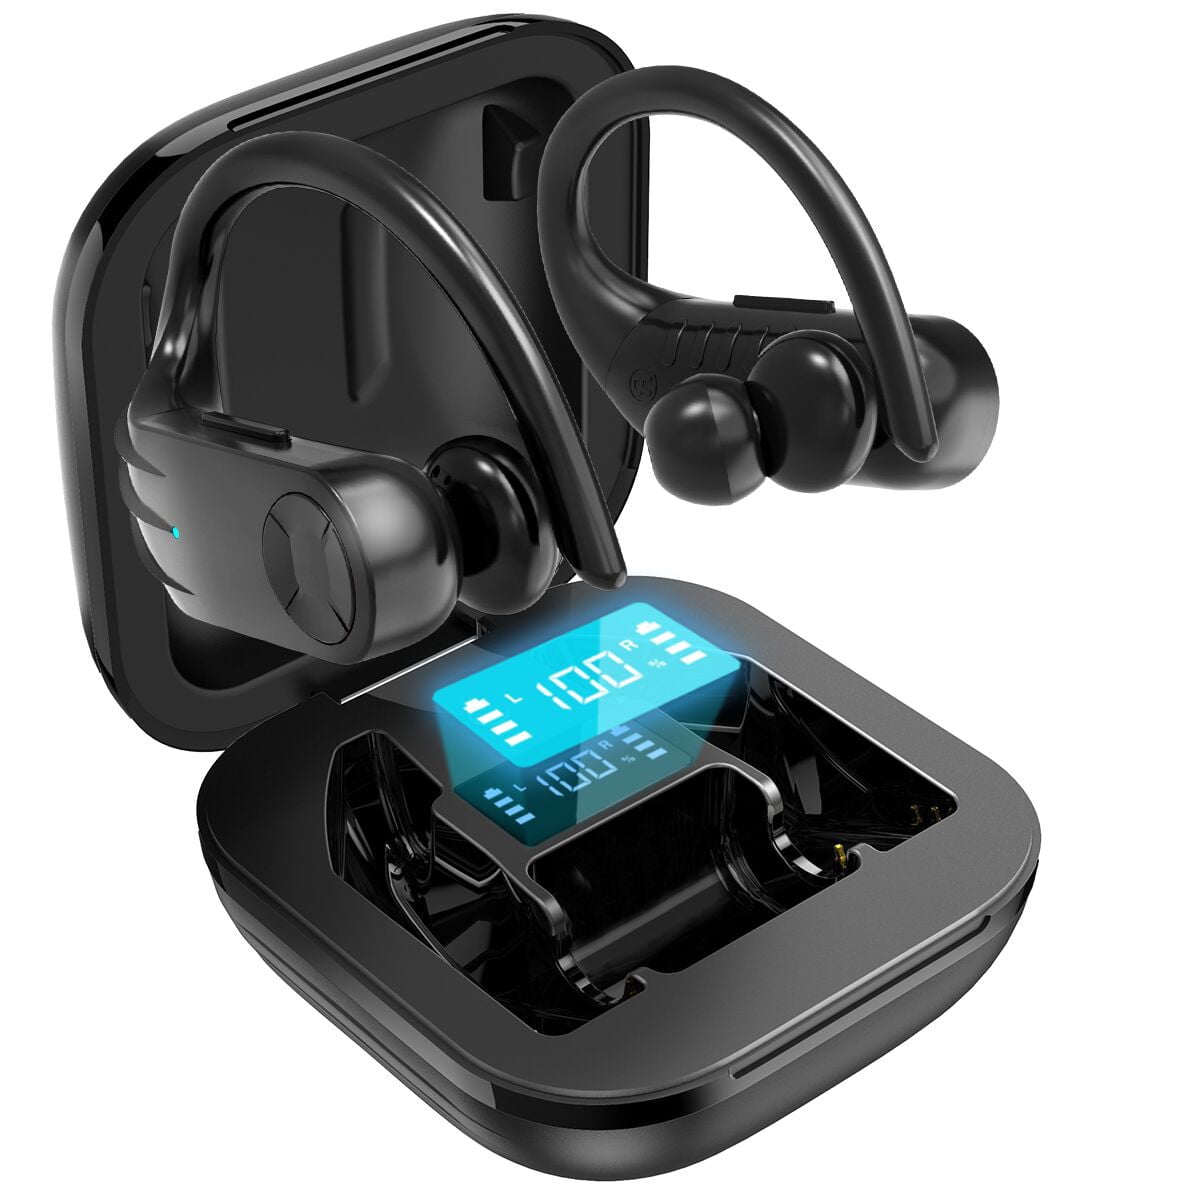 Troubleshooting: Fixing Low Volume On Wireless Earbuds